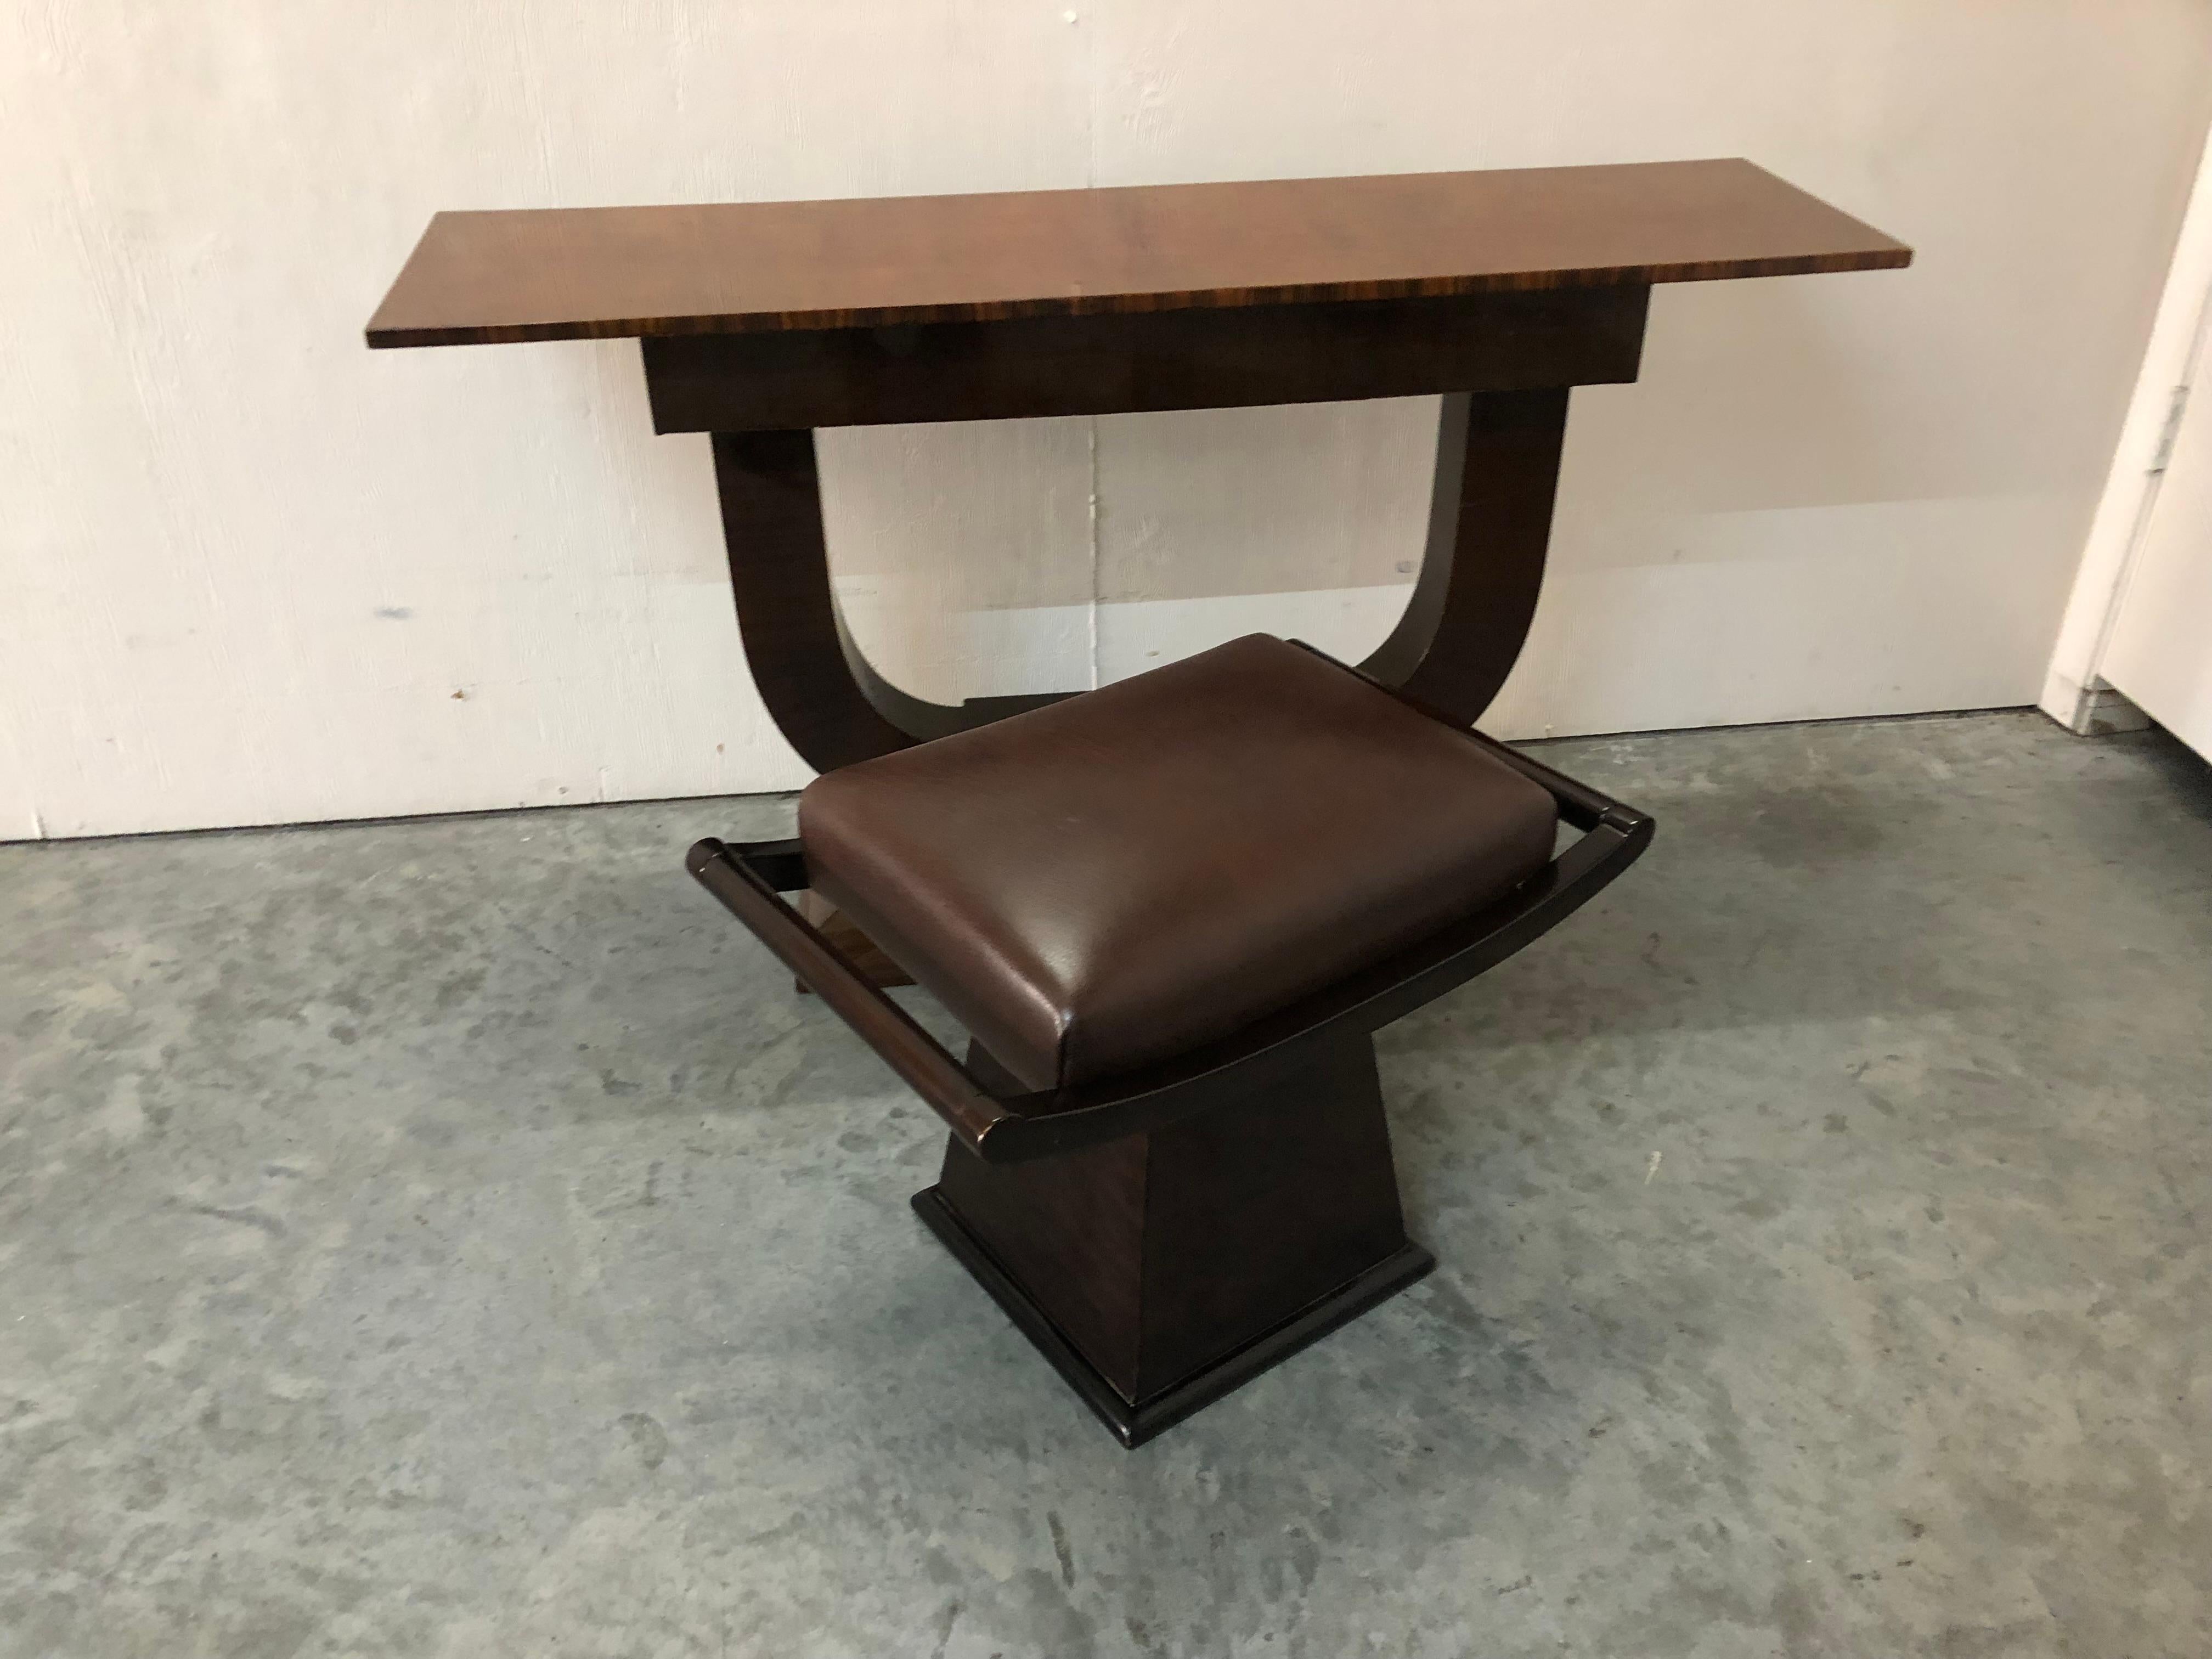 Stools Art Deco.
Material: wood and leather
You want to live in the golden years, this is the stool that your project needs.
We have specialized in the sale of Art Deco and Art Nouveau styles since 1982.If you have any questions we are at your